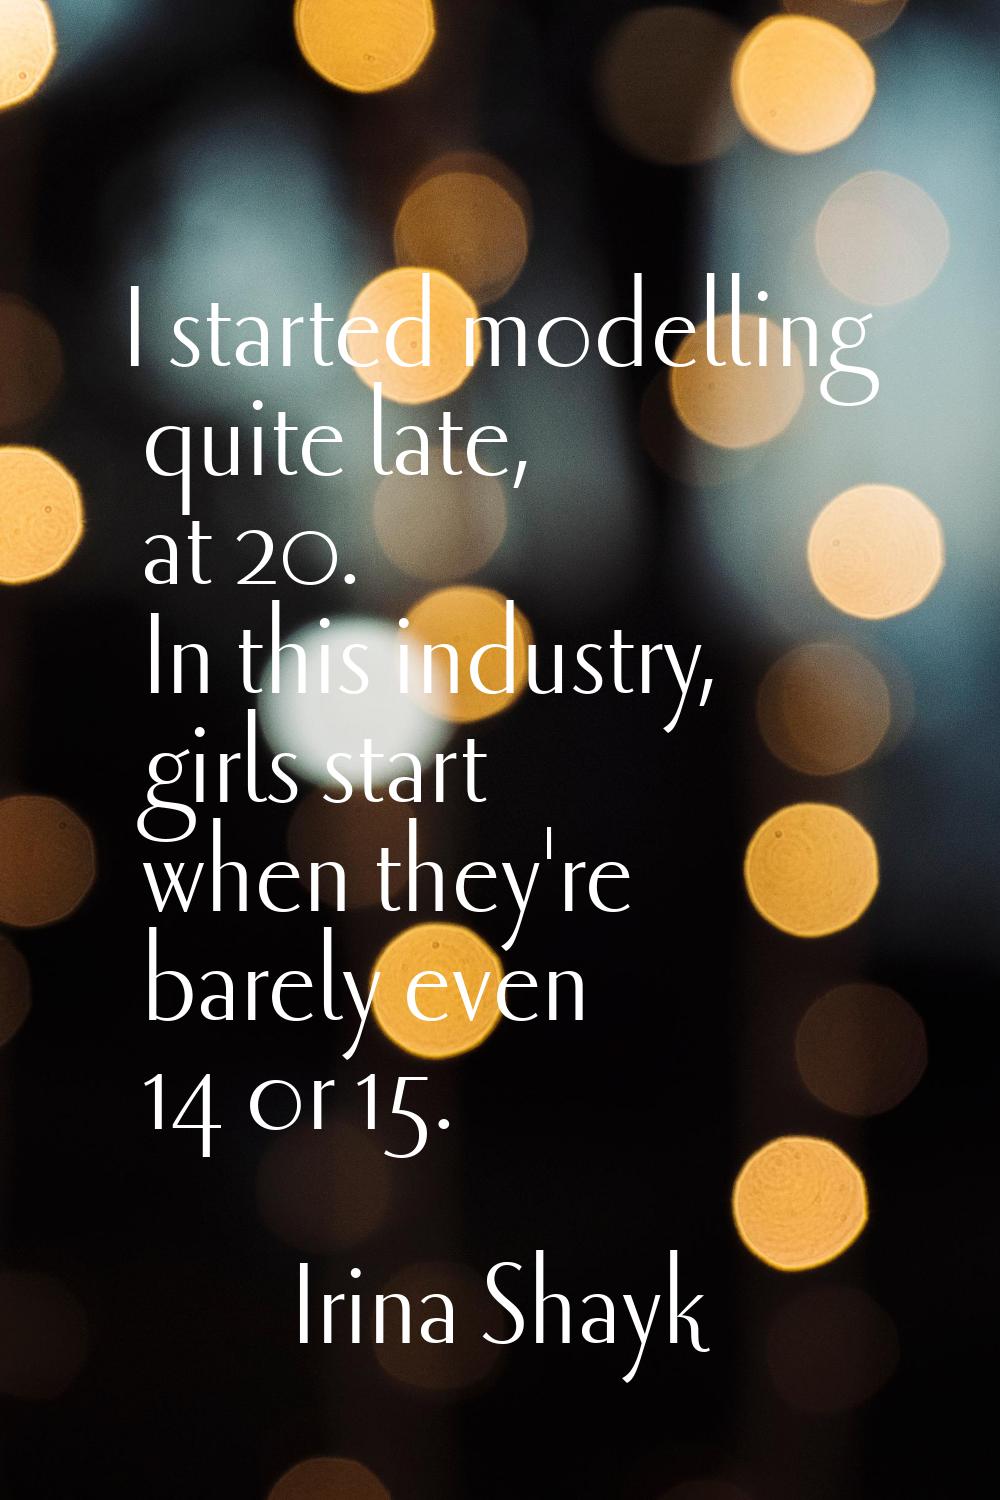 I started modelling quite late, at 20. In this industry, girls start when they're barely even 14 or